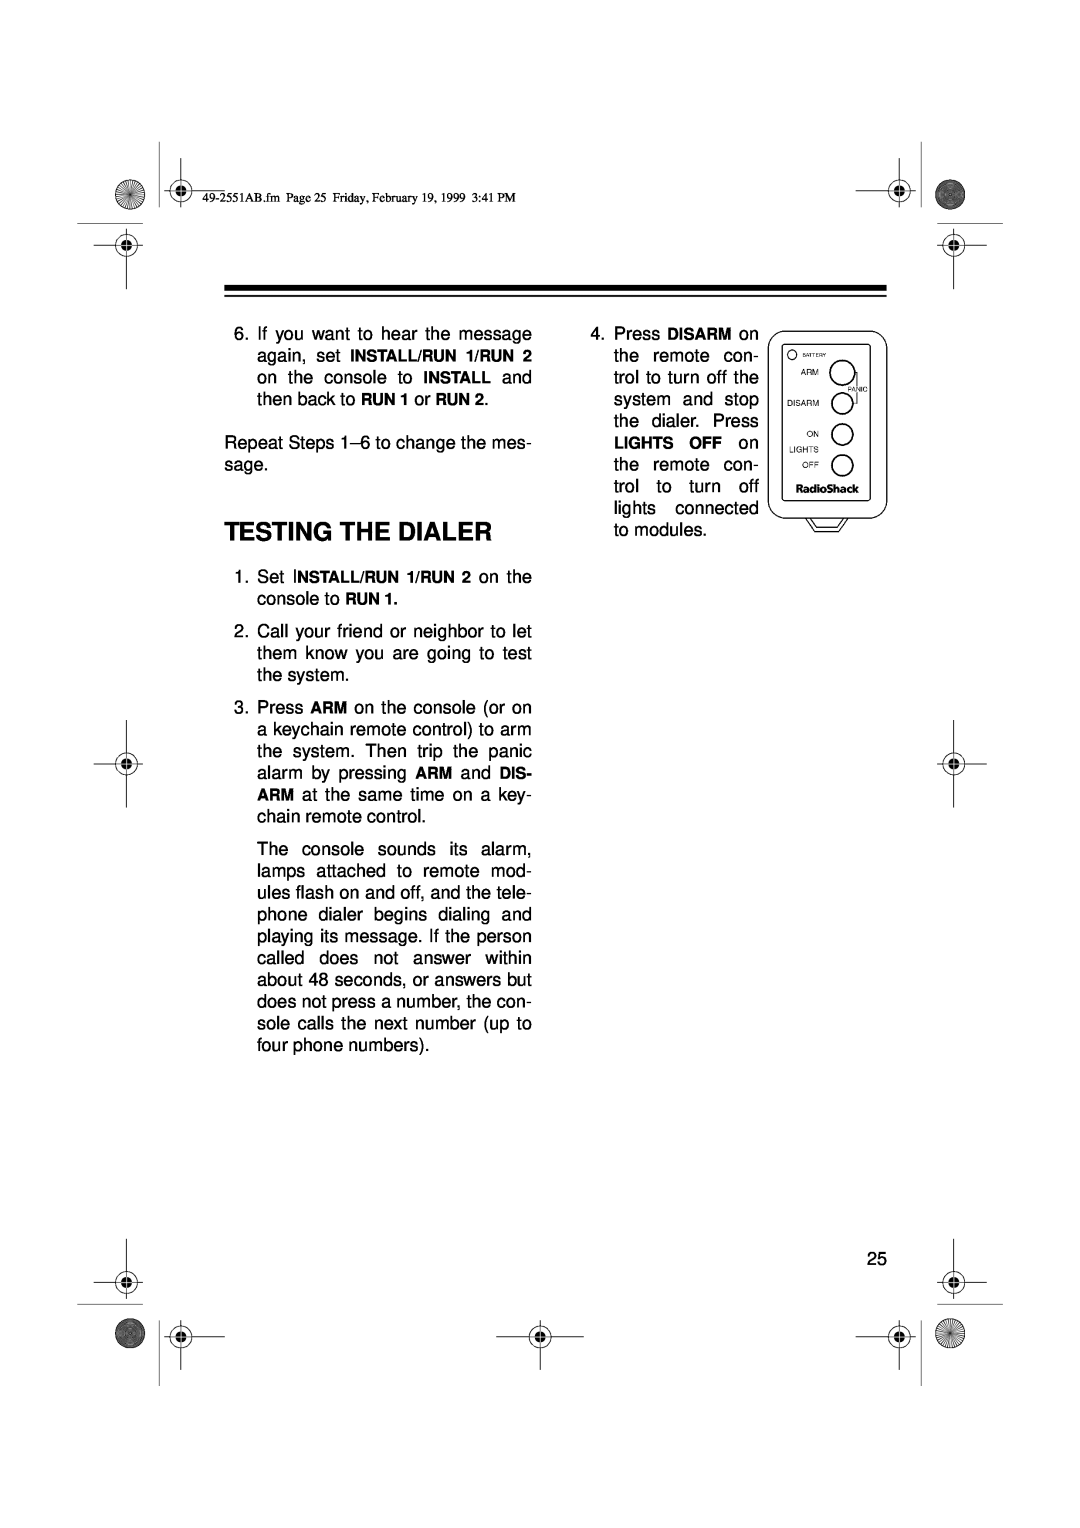 Radio Shack 49-2551A owner manual Testing The Dialer 